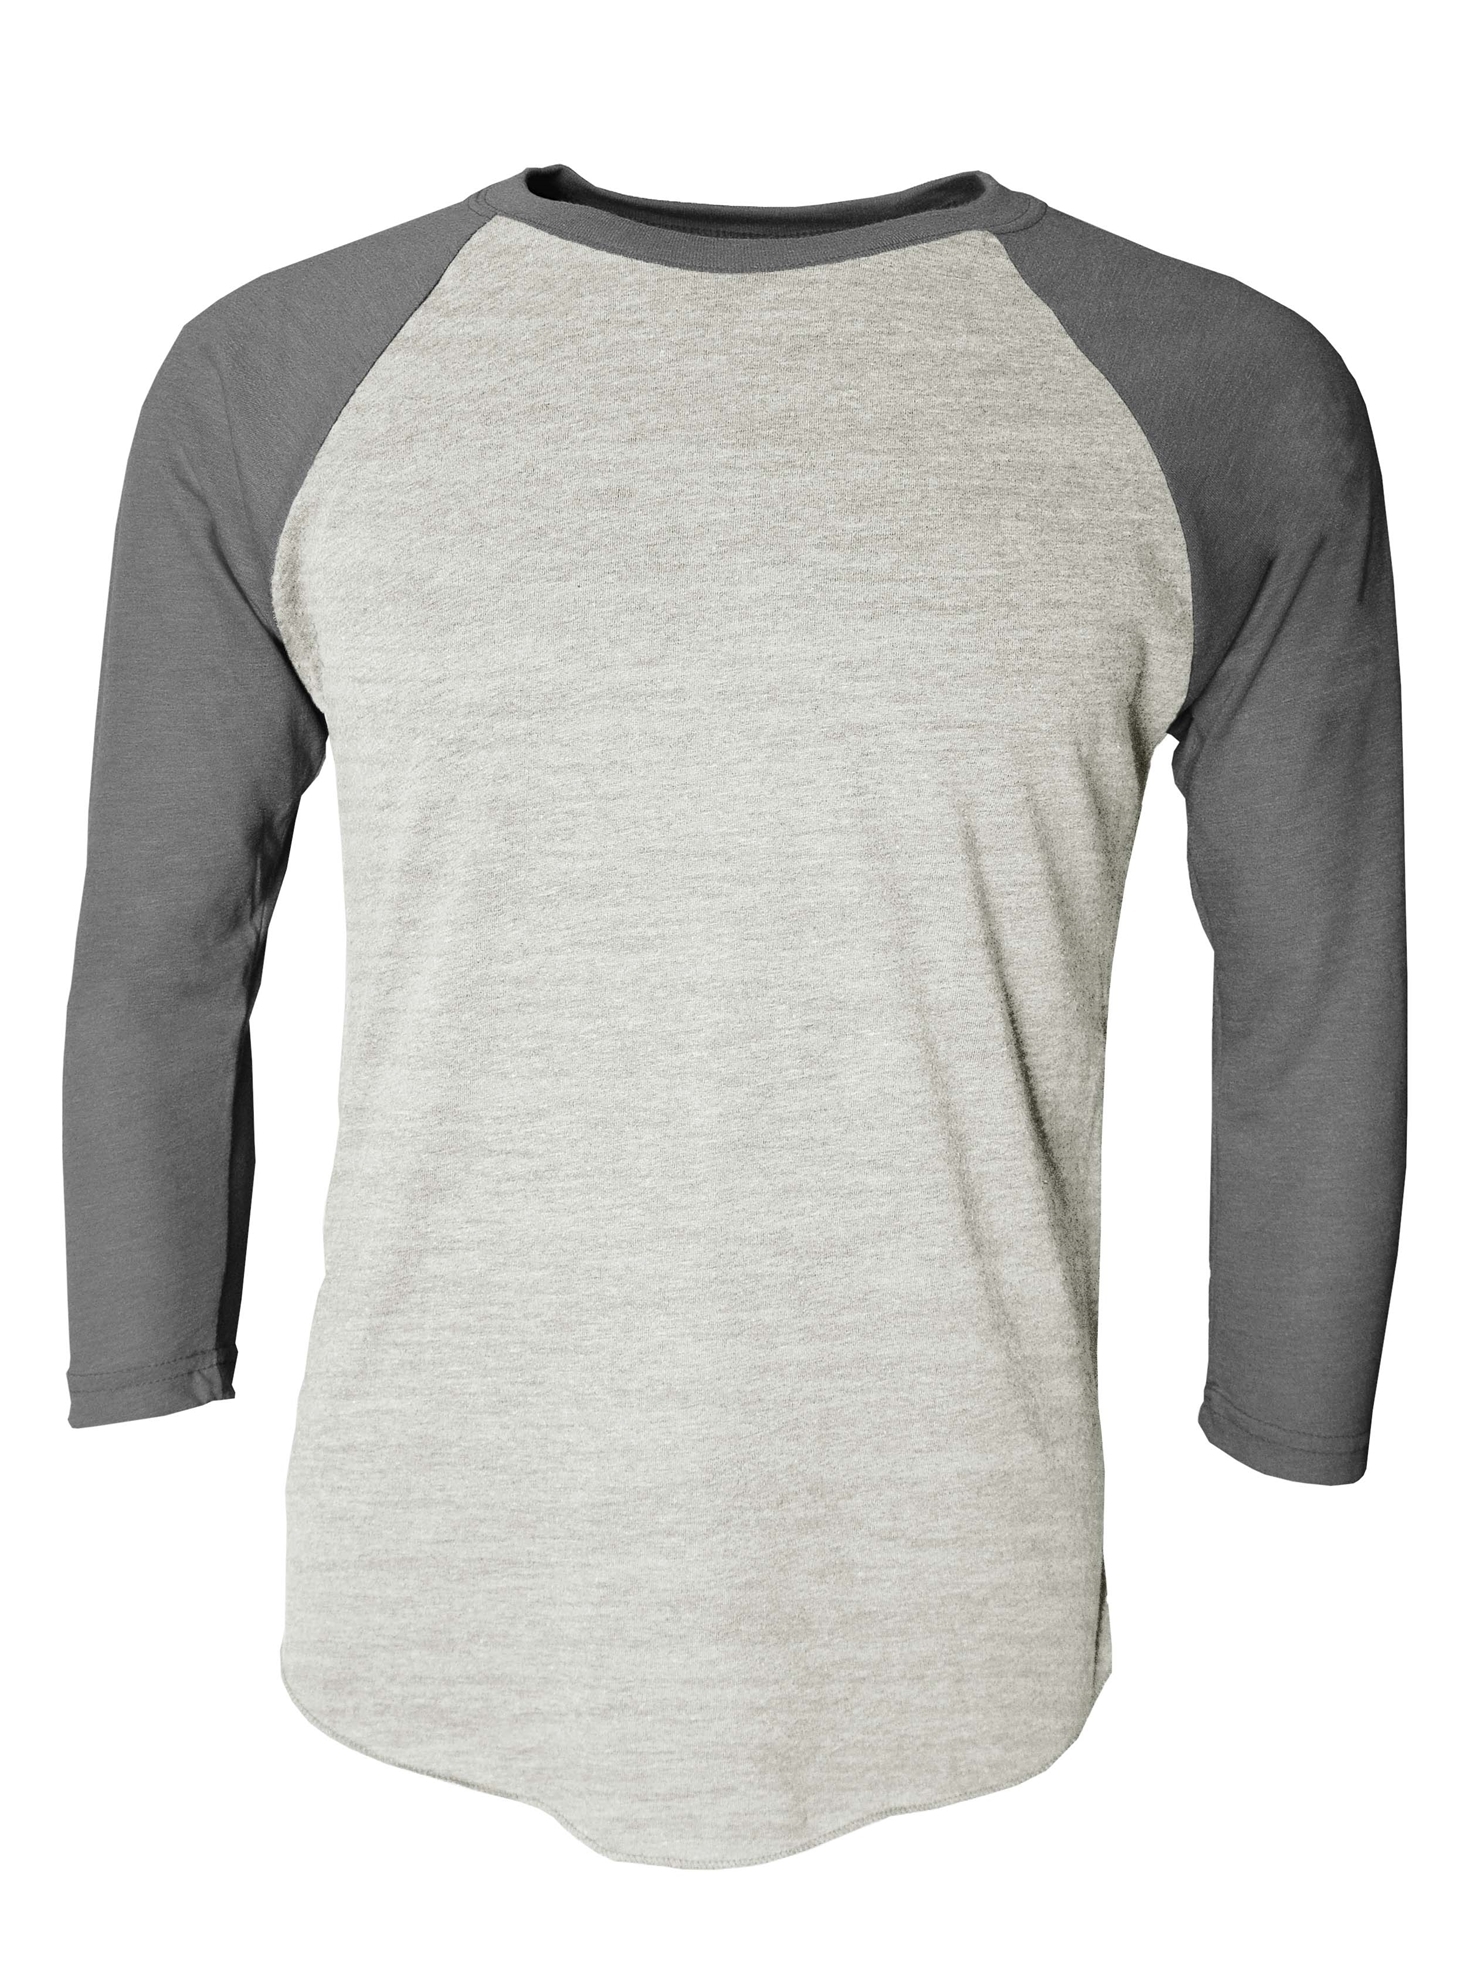 click to view ASH/SPORTS GREY